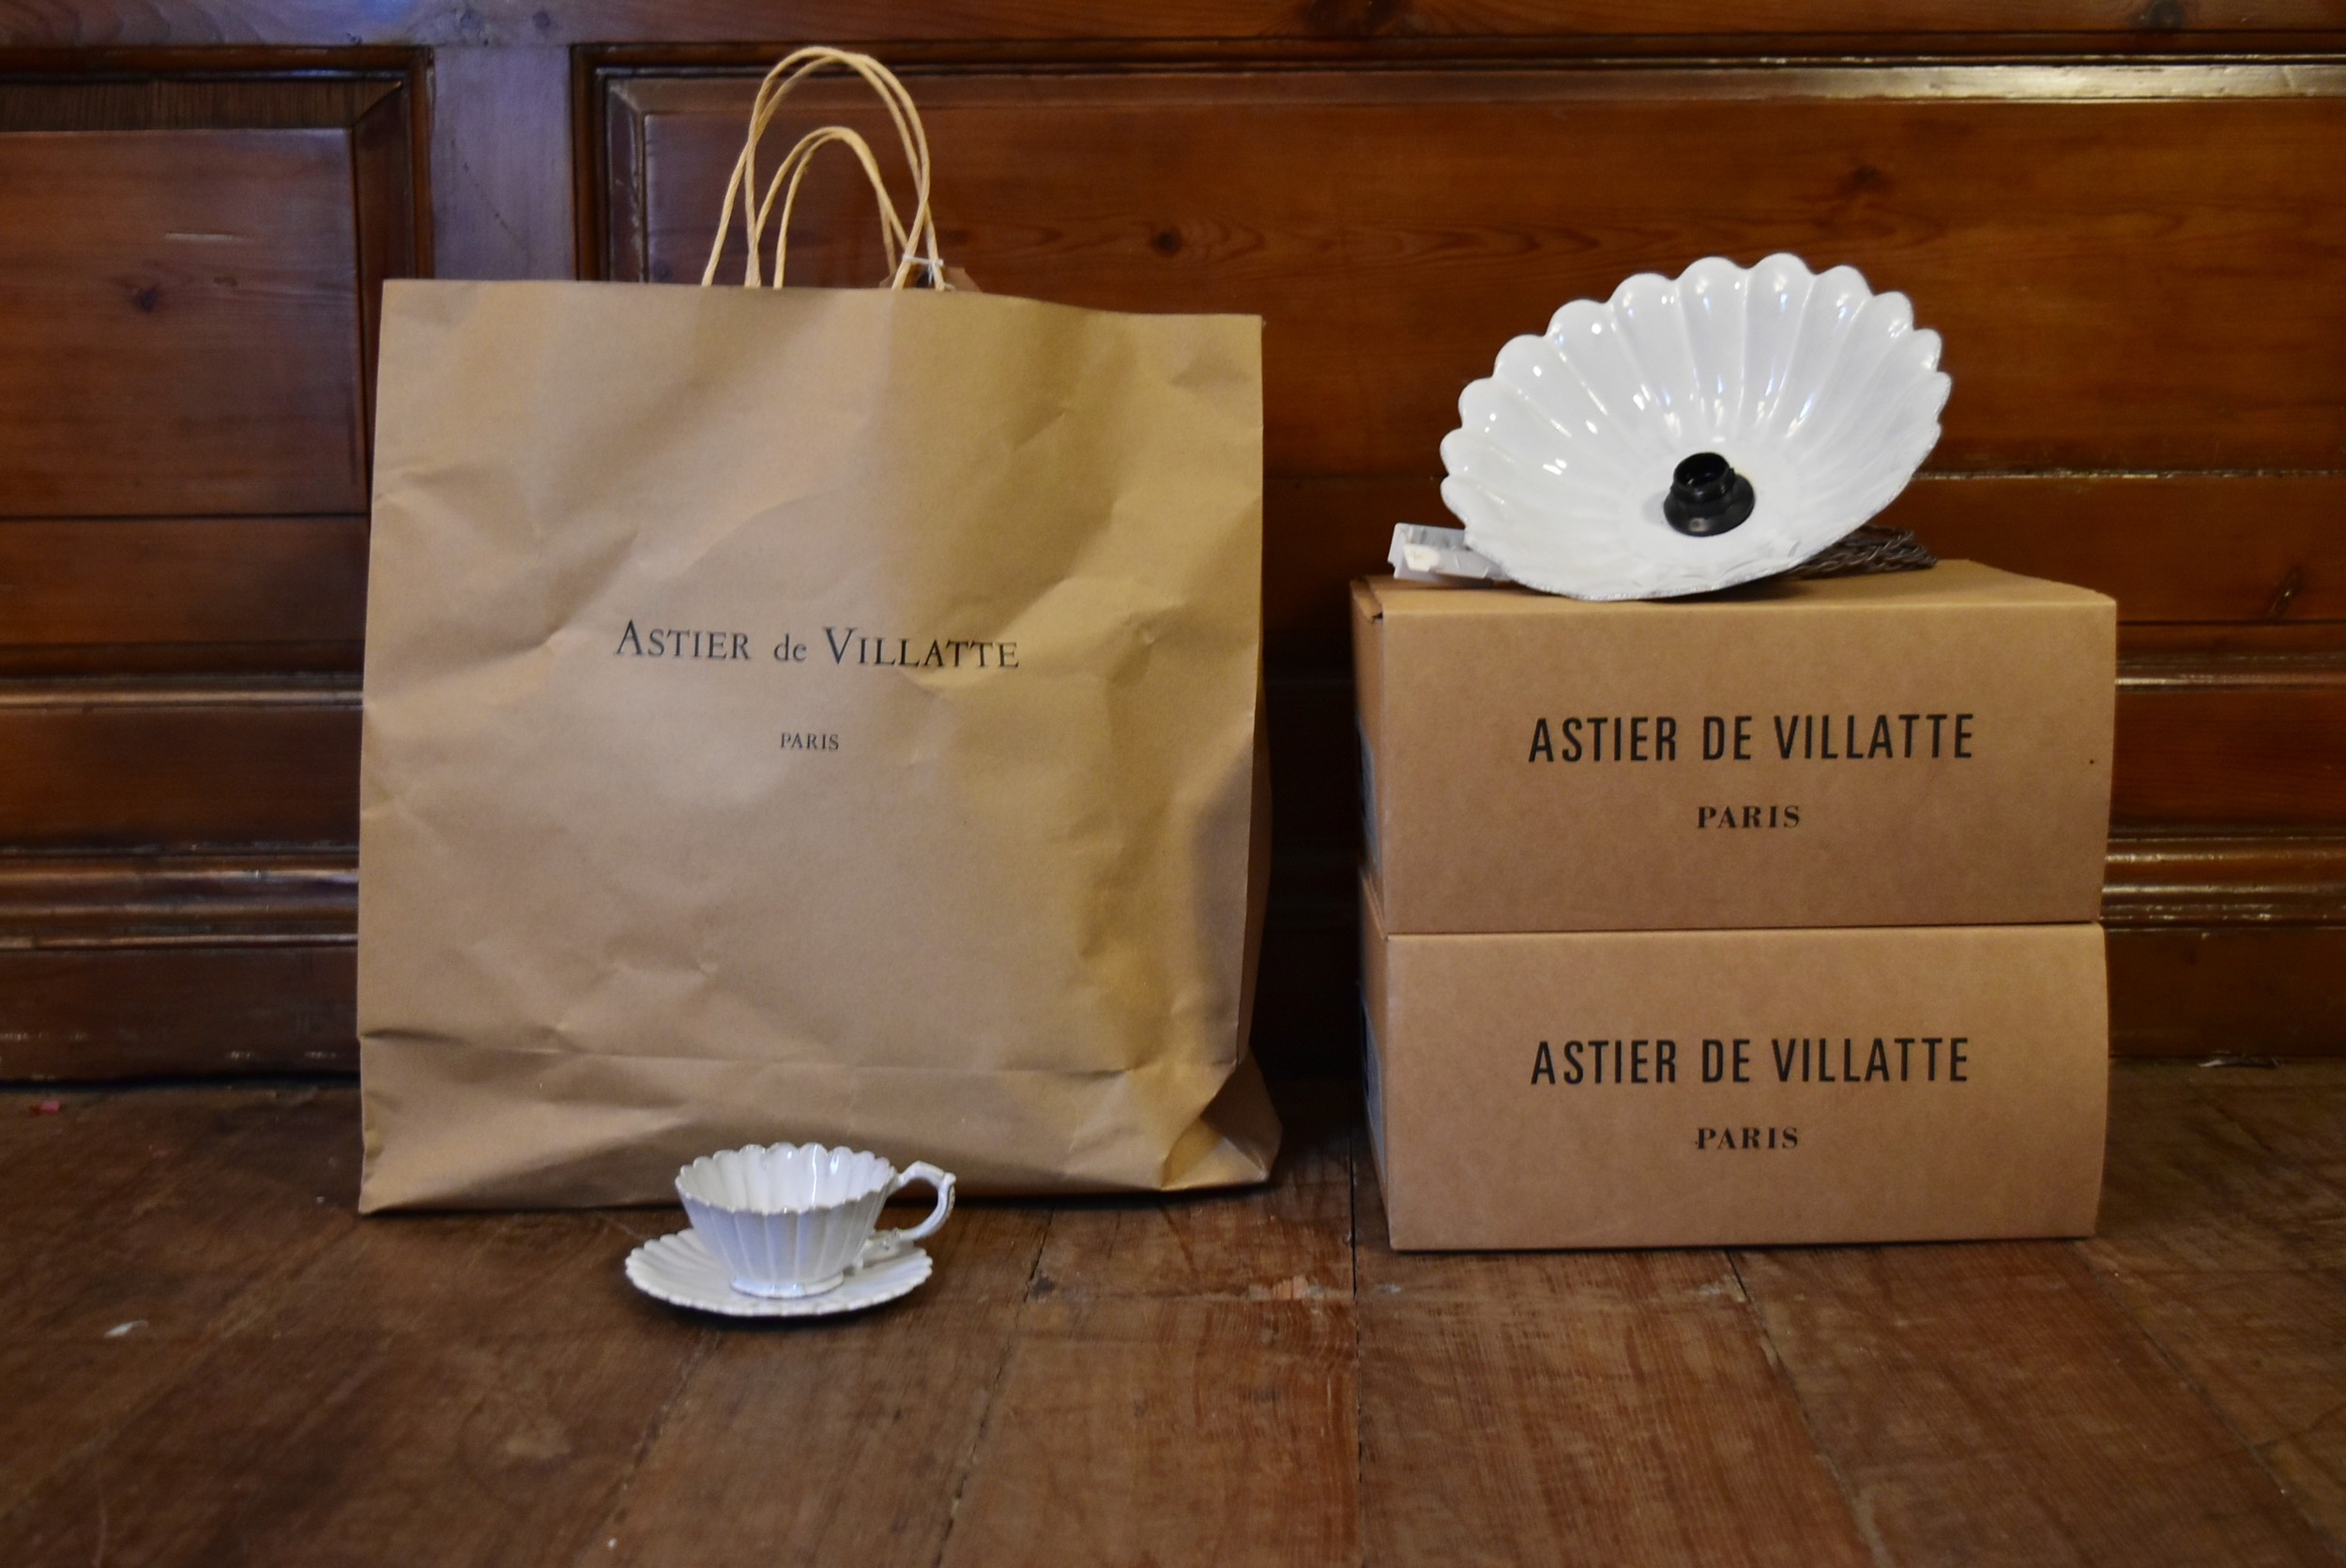 A set of five Astier de Villatte cups and saucers along with a pair of similar pendant light shades.